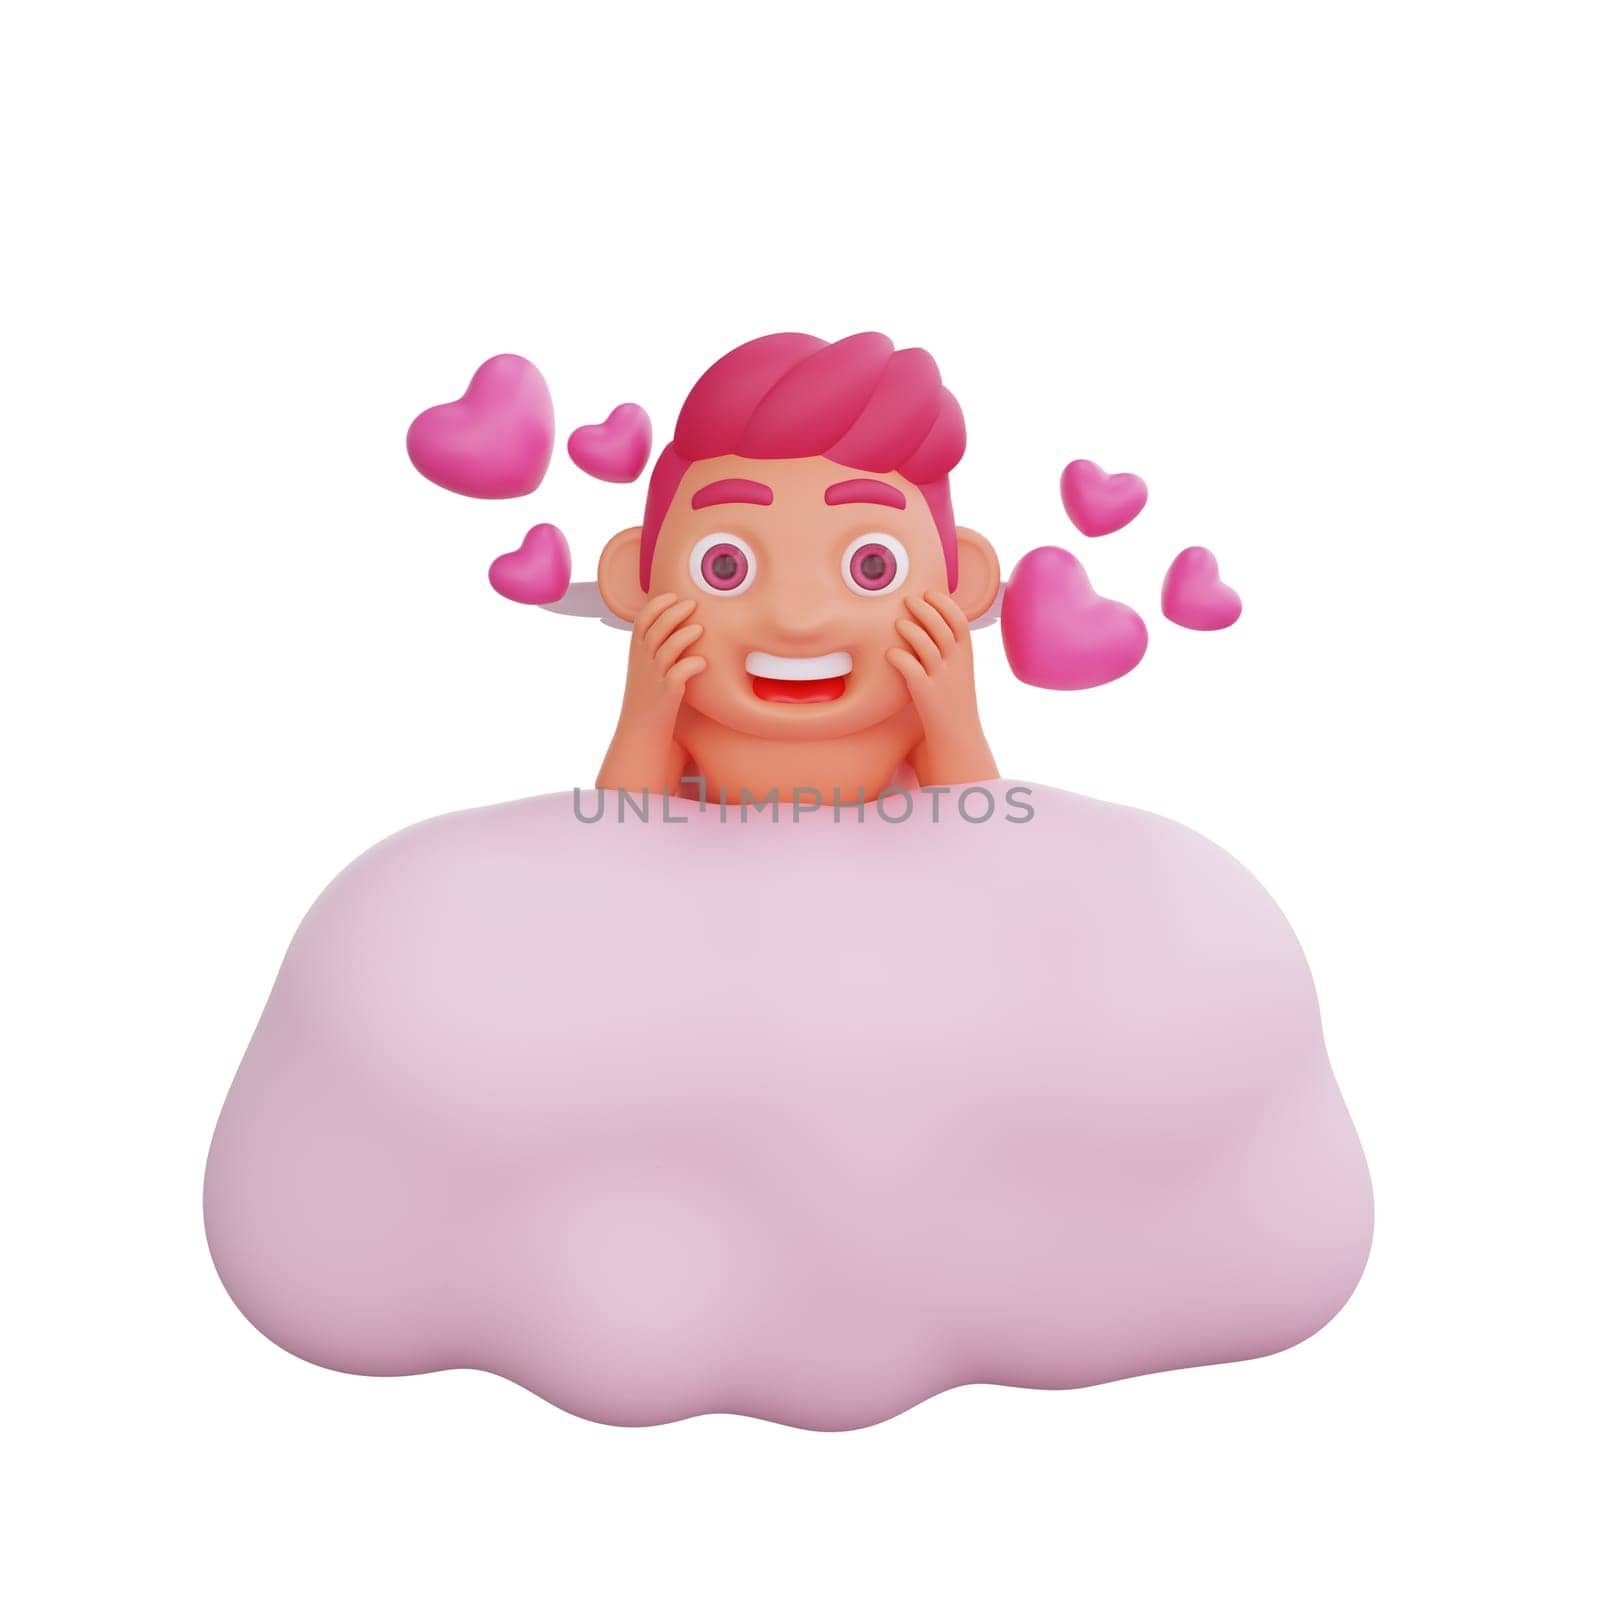 3D illustration of Valentine Cupid character relaxing on a cloud by Rahmat_Djayusman